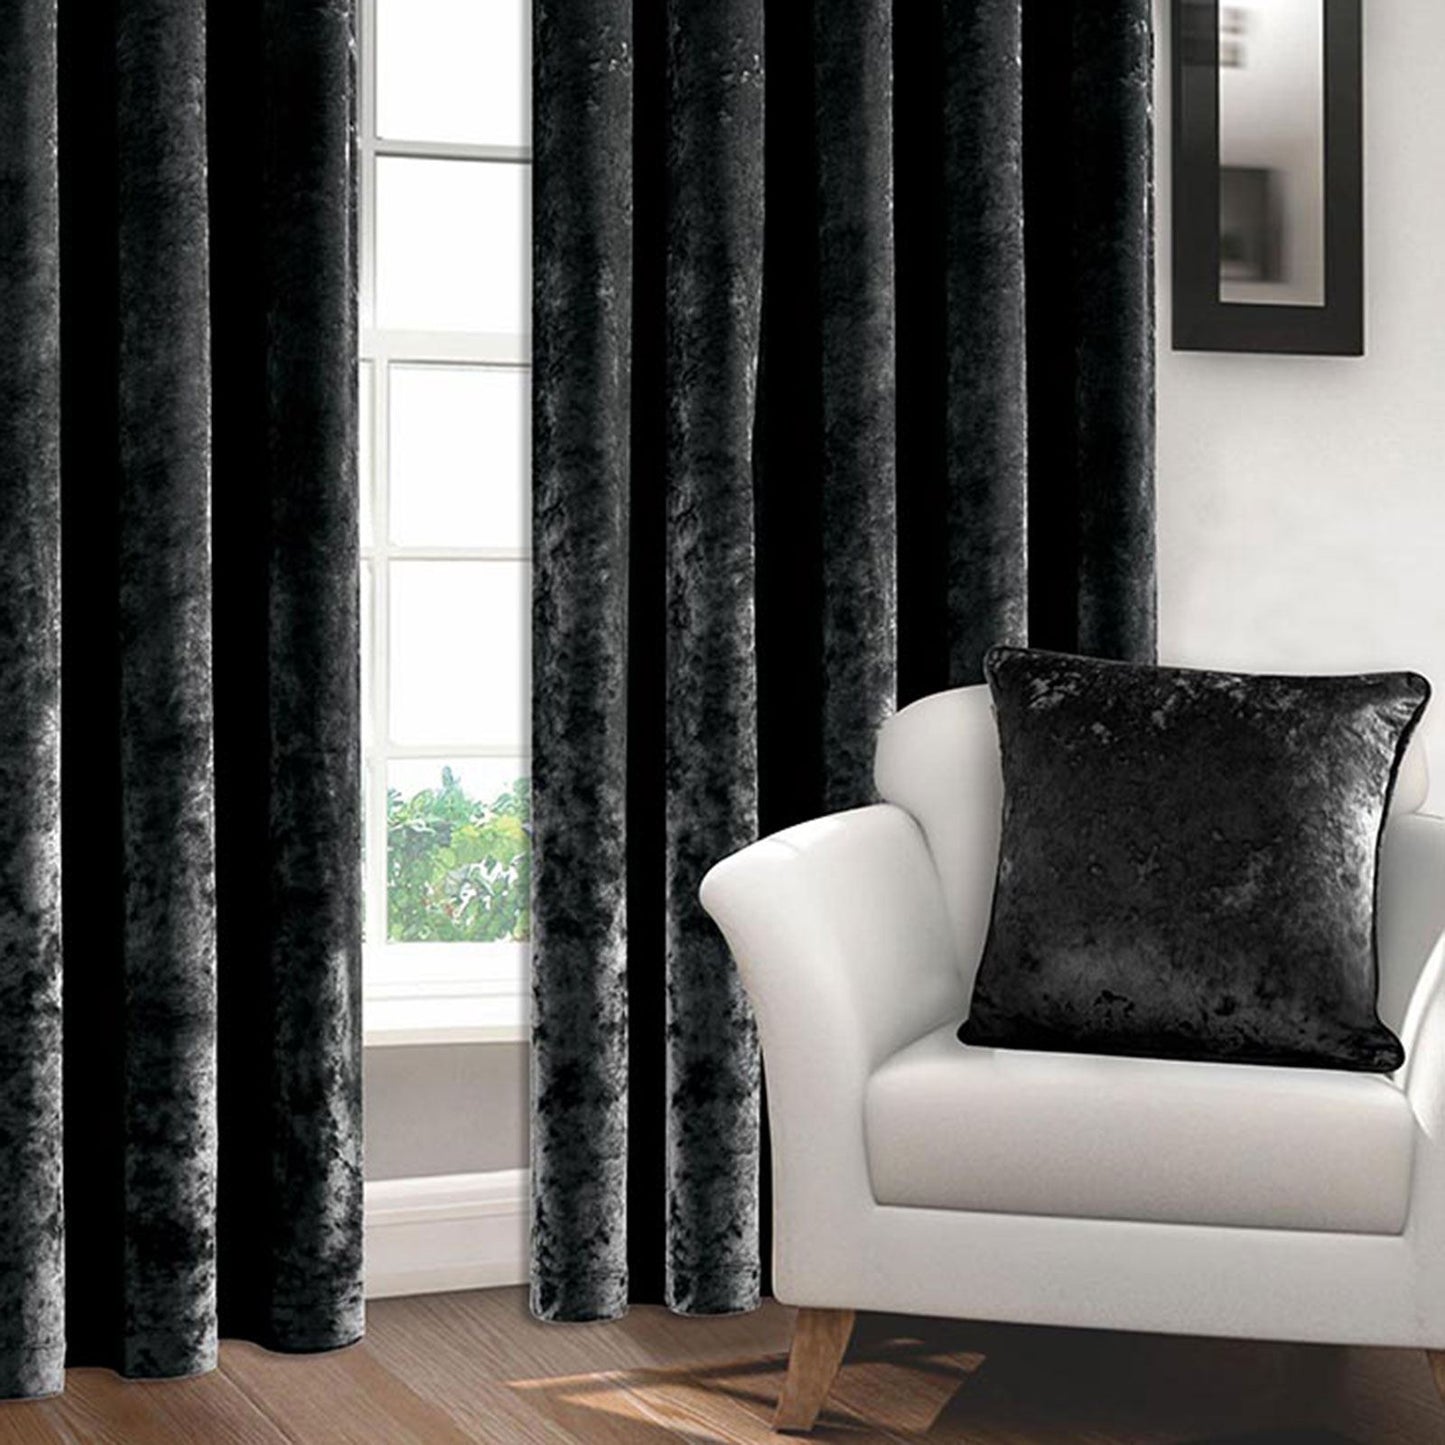 Luxurious Crushed Velvet Curtains for a Glamorous Look